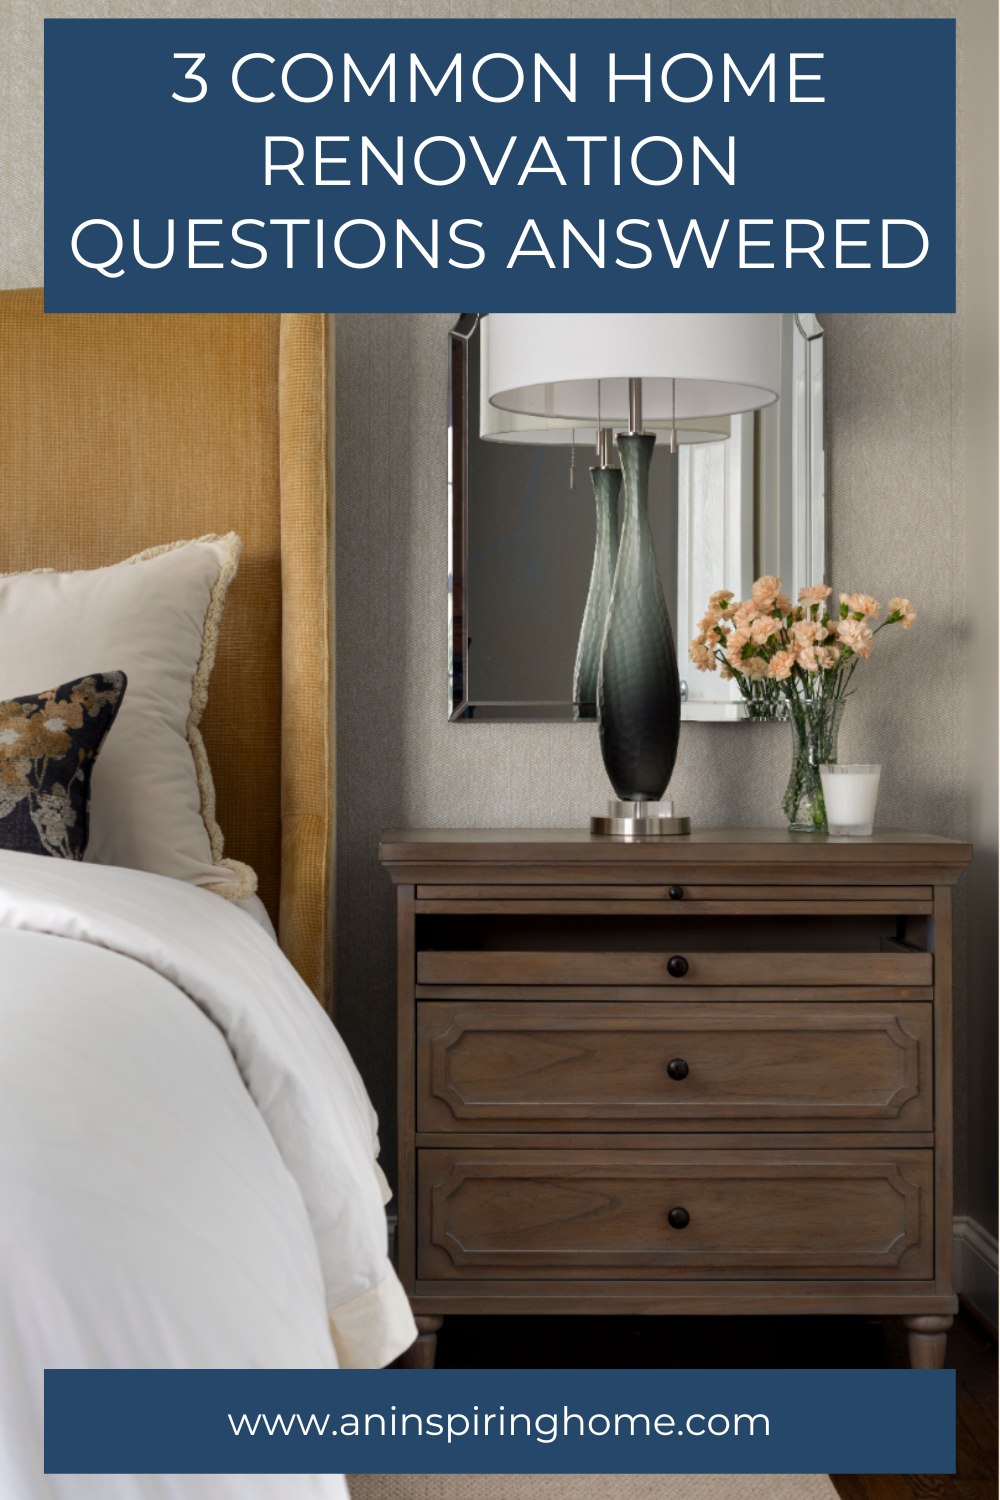 3 Common Home Renovation Questions Answered